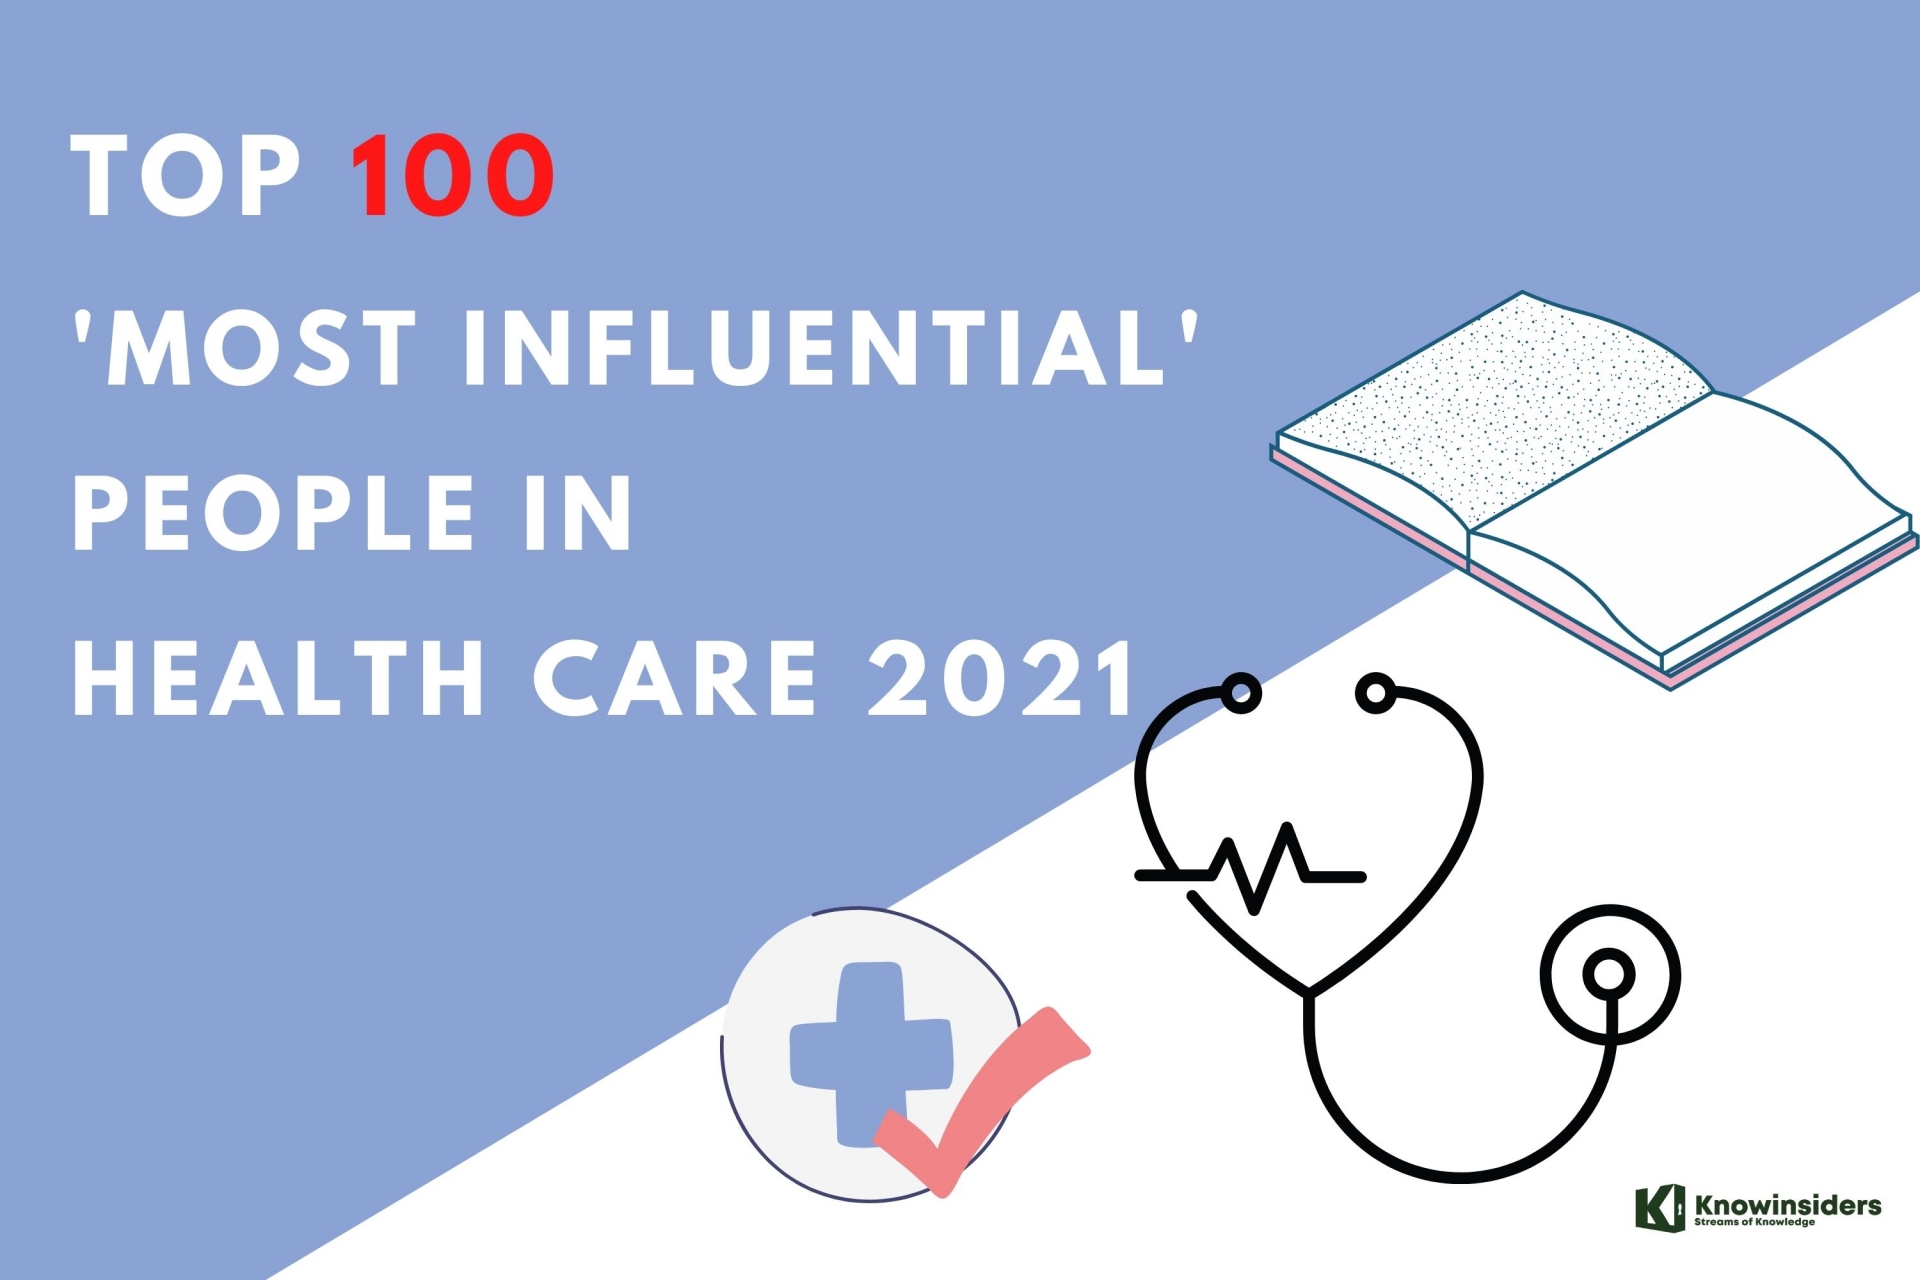 Top 100 'Most Influential' People in Health Care